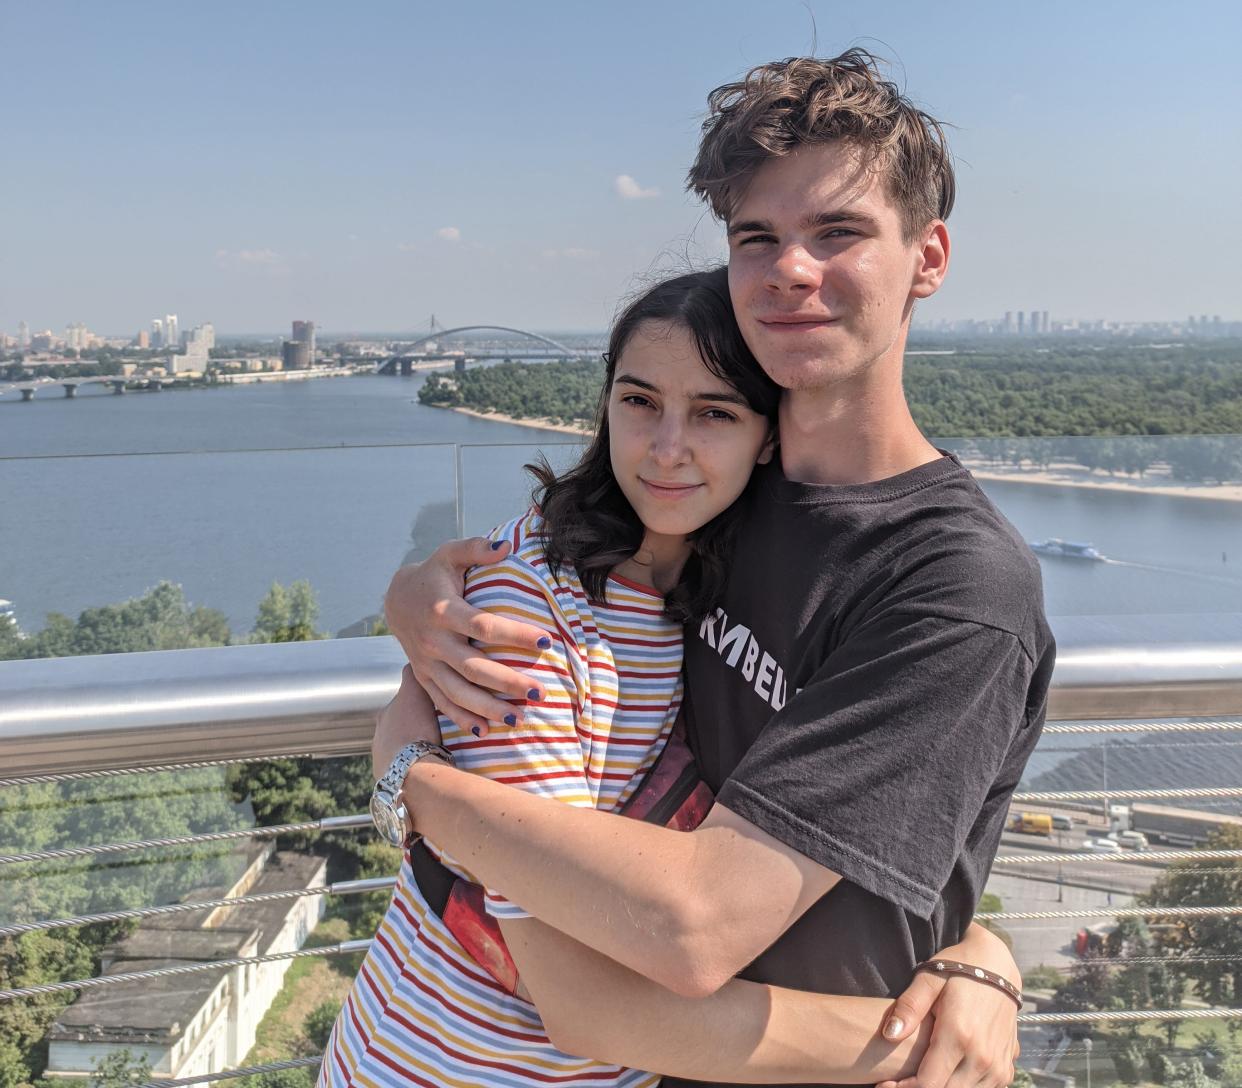 Vlad Sazhen and his girlfriend, Alina, pose for a photo.